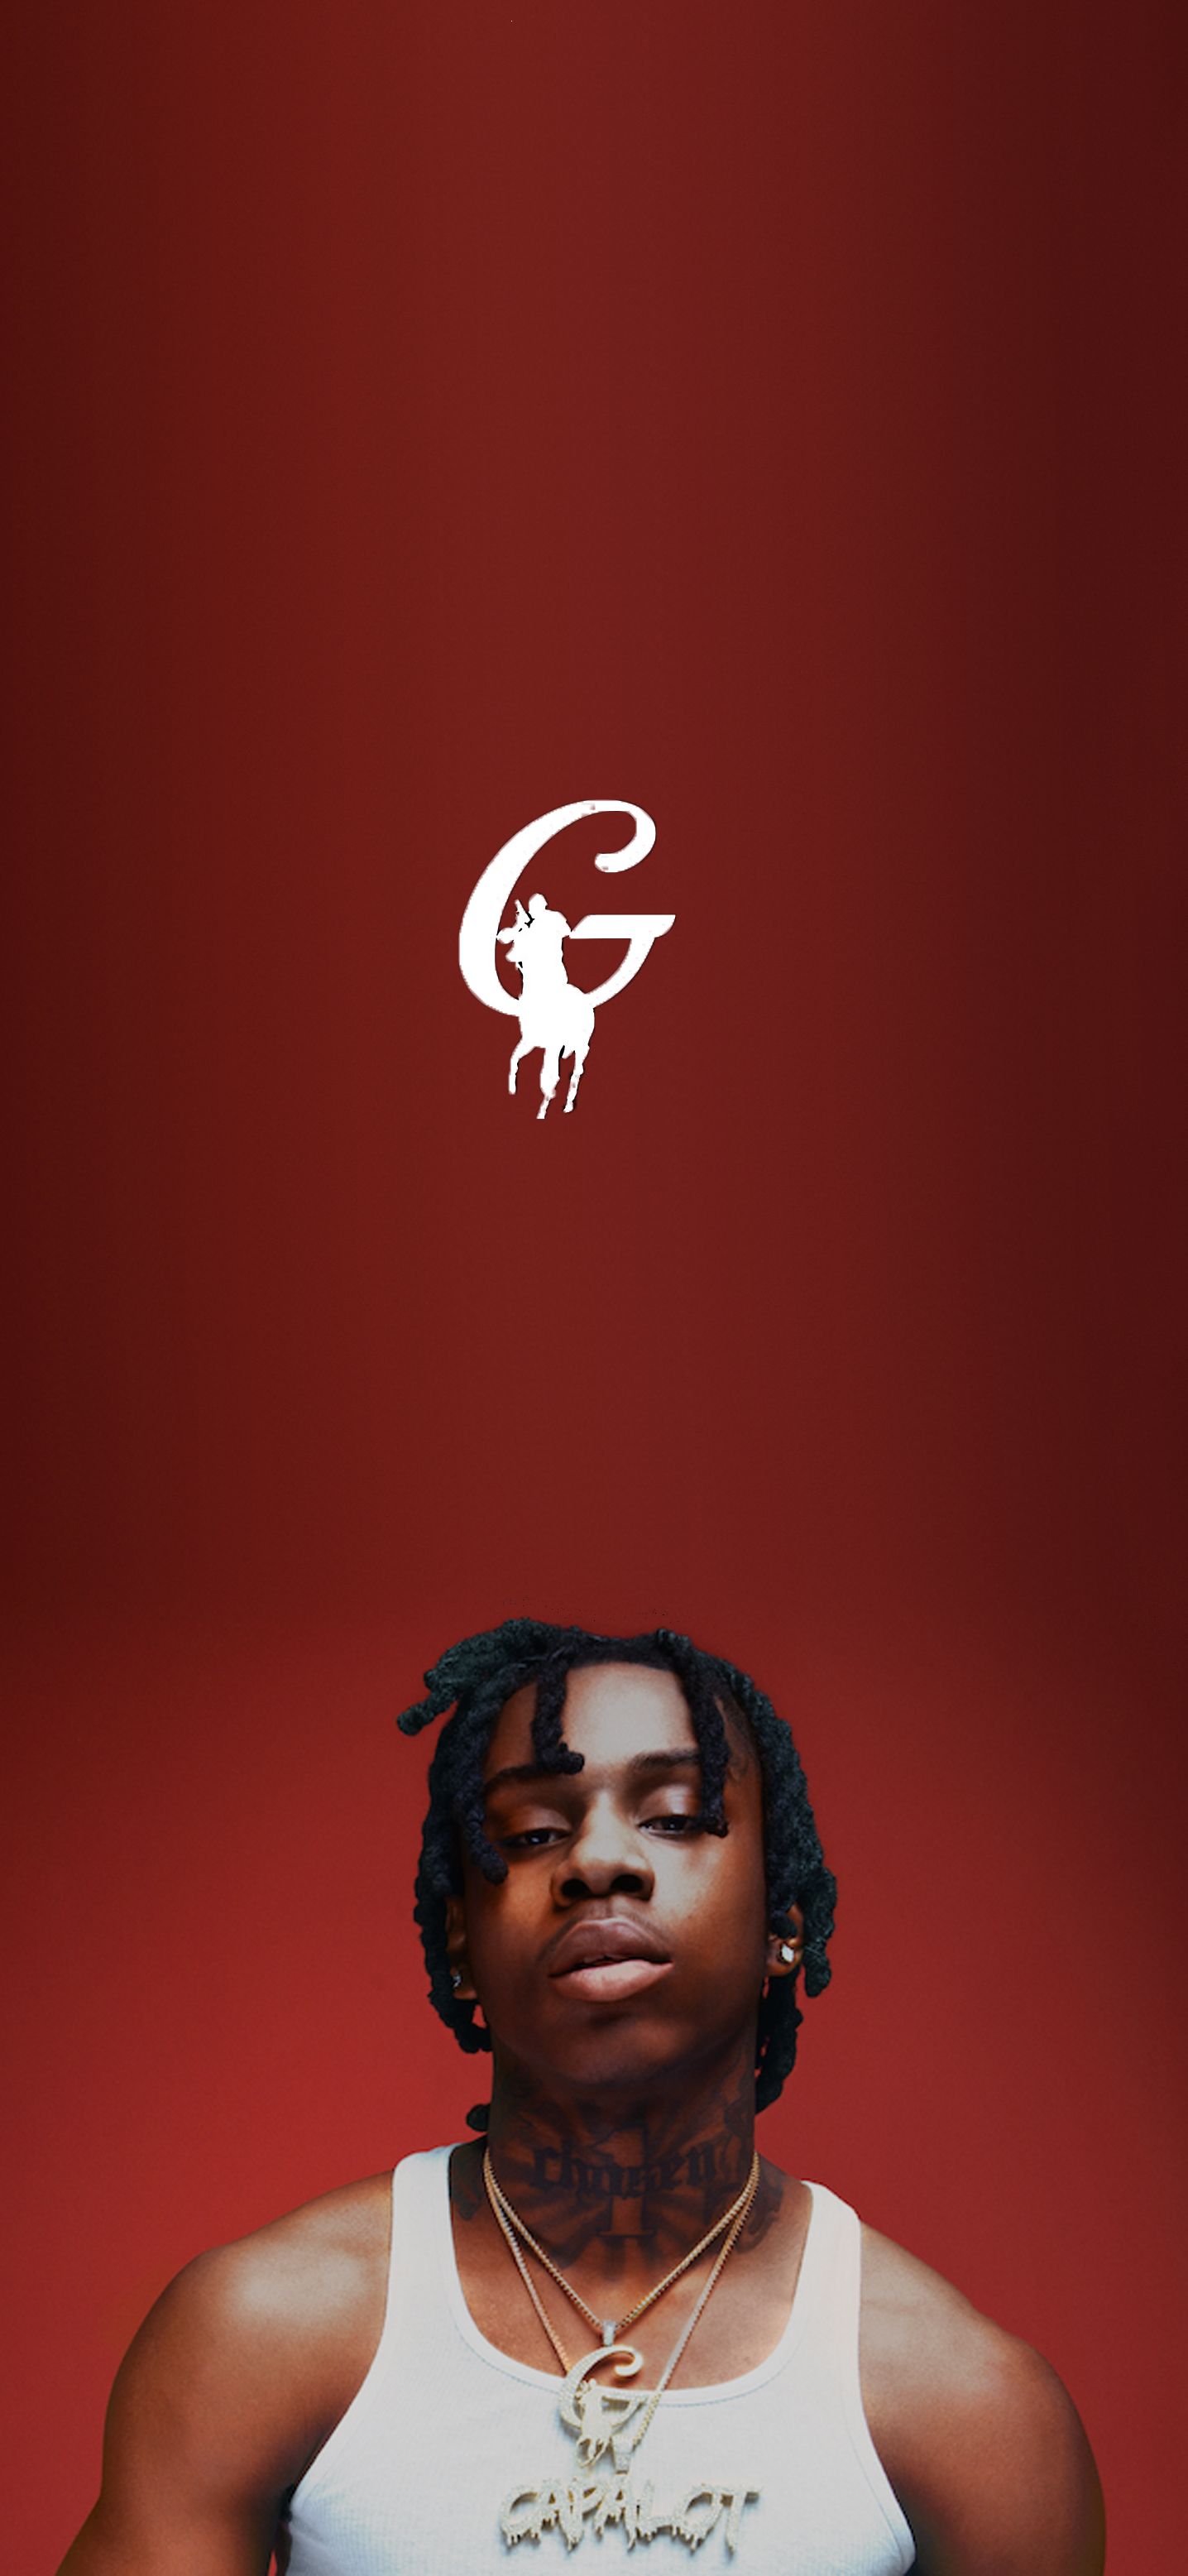 Polo G iPhone Wallpapers - Wallpaper Cave